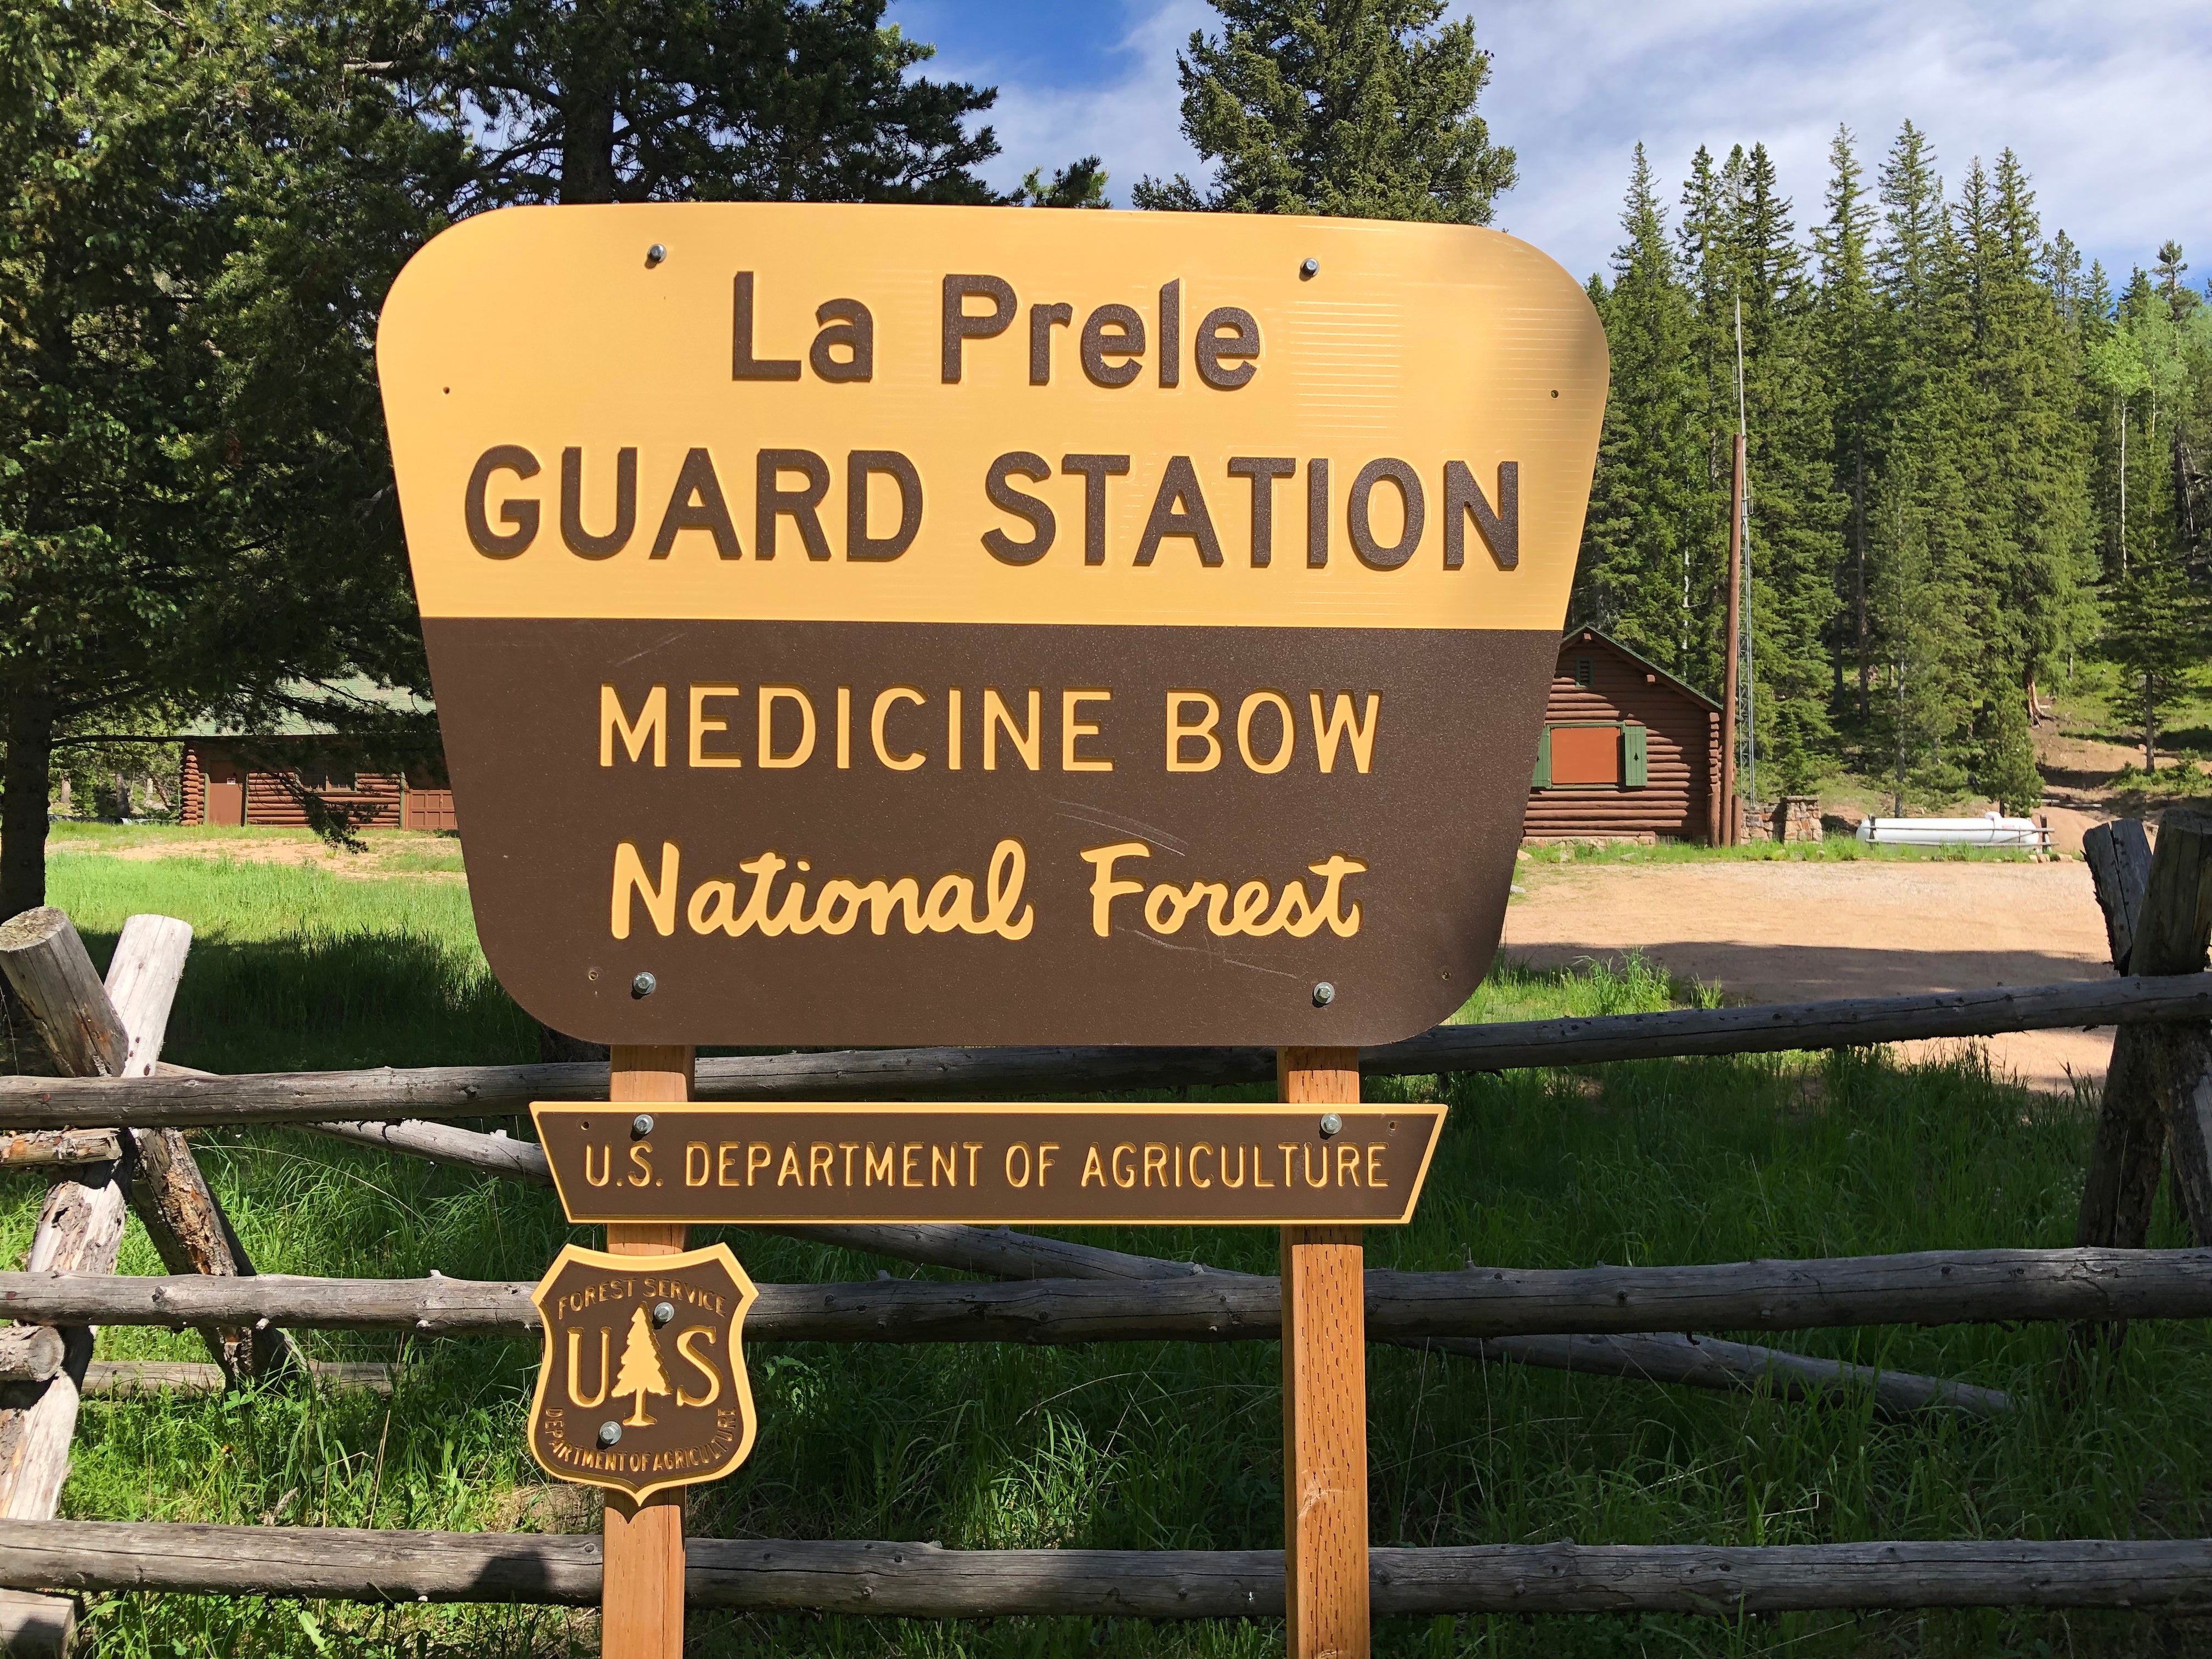 Camper submitted image from La Prele Guard Station - 3